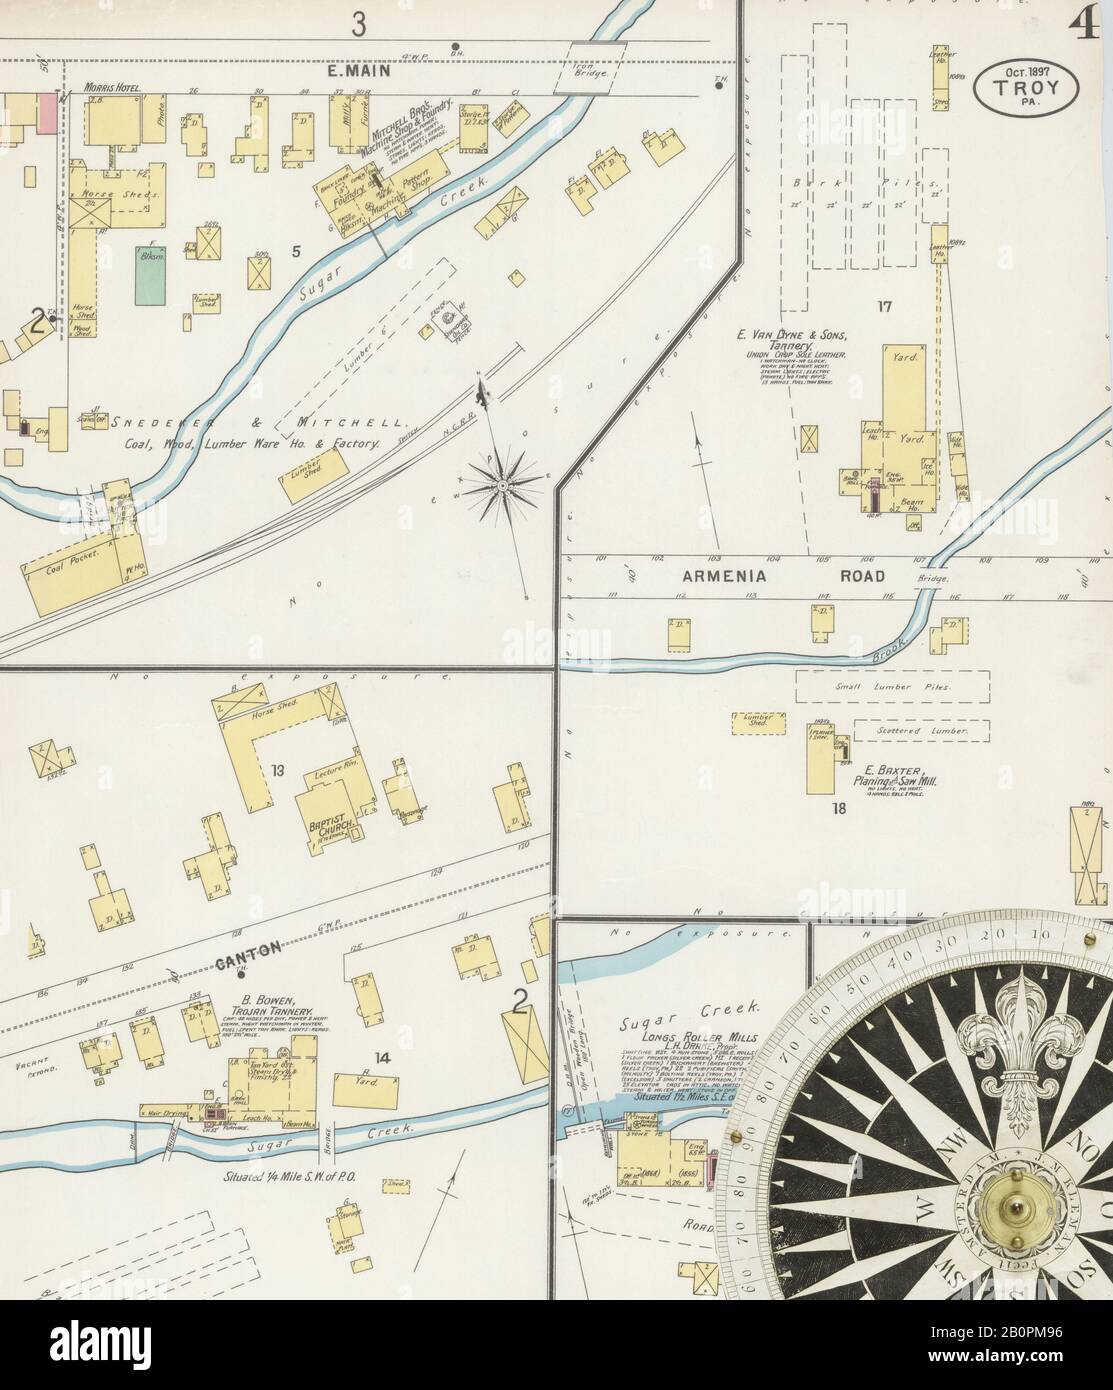 Image 4 of Sanborn Fire Insurance Map from Troy, Bradford County, Pennsylvania. Oct 1897. 4 Sheet(s), America, street map with a Nineteenth Century compass Stock Photo